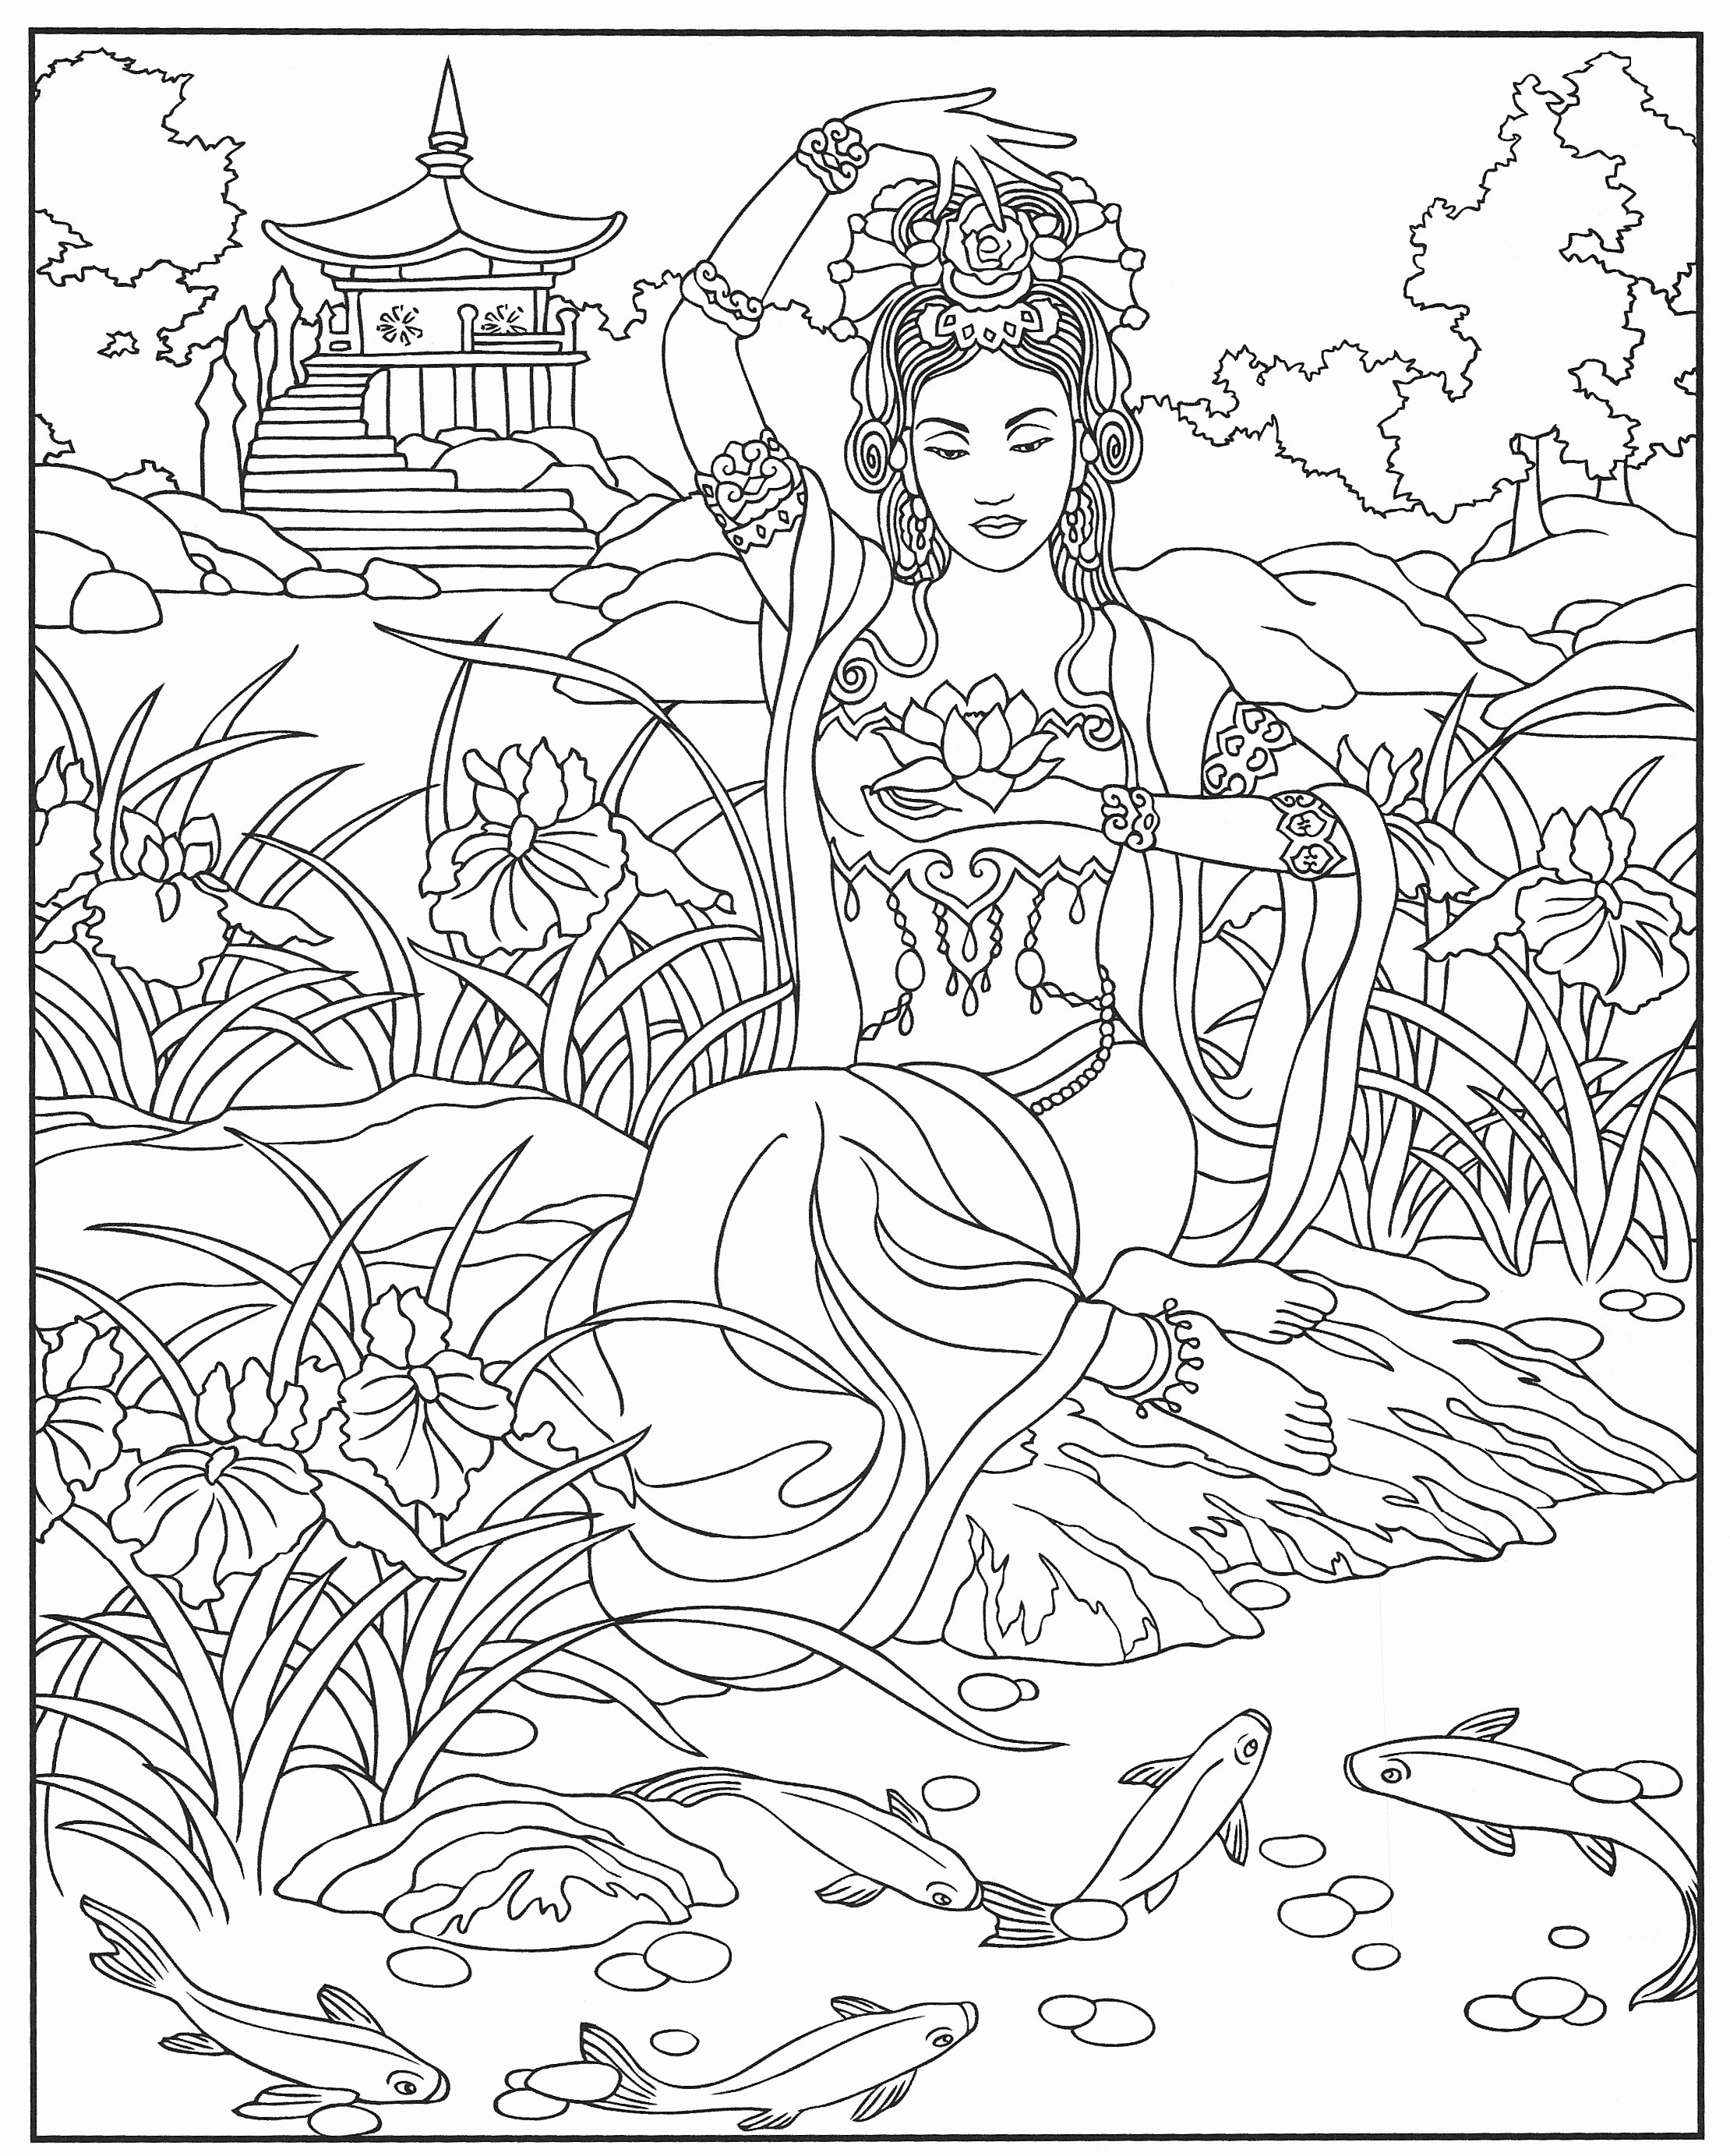 20 Amazing Lady Face Vases 2024 free download lady face vases of coloring pages free printable coloring pages for children that you throughout girls color pages cool coloring page unique witch coloring pages new crayola pages 0d